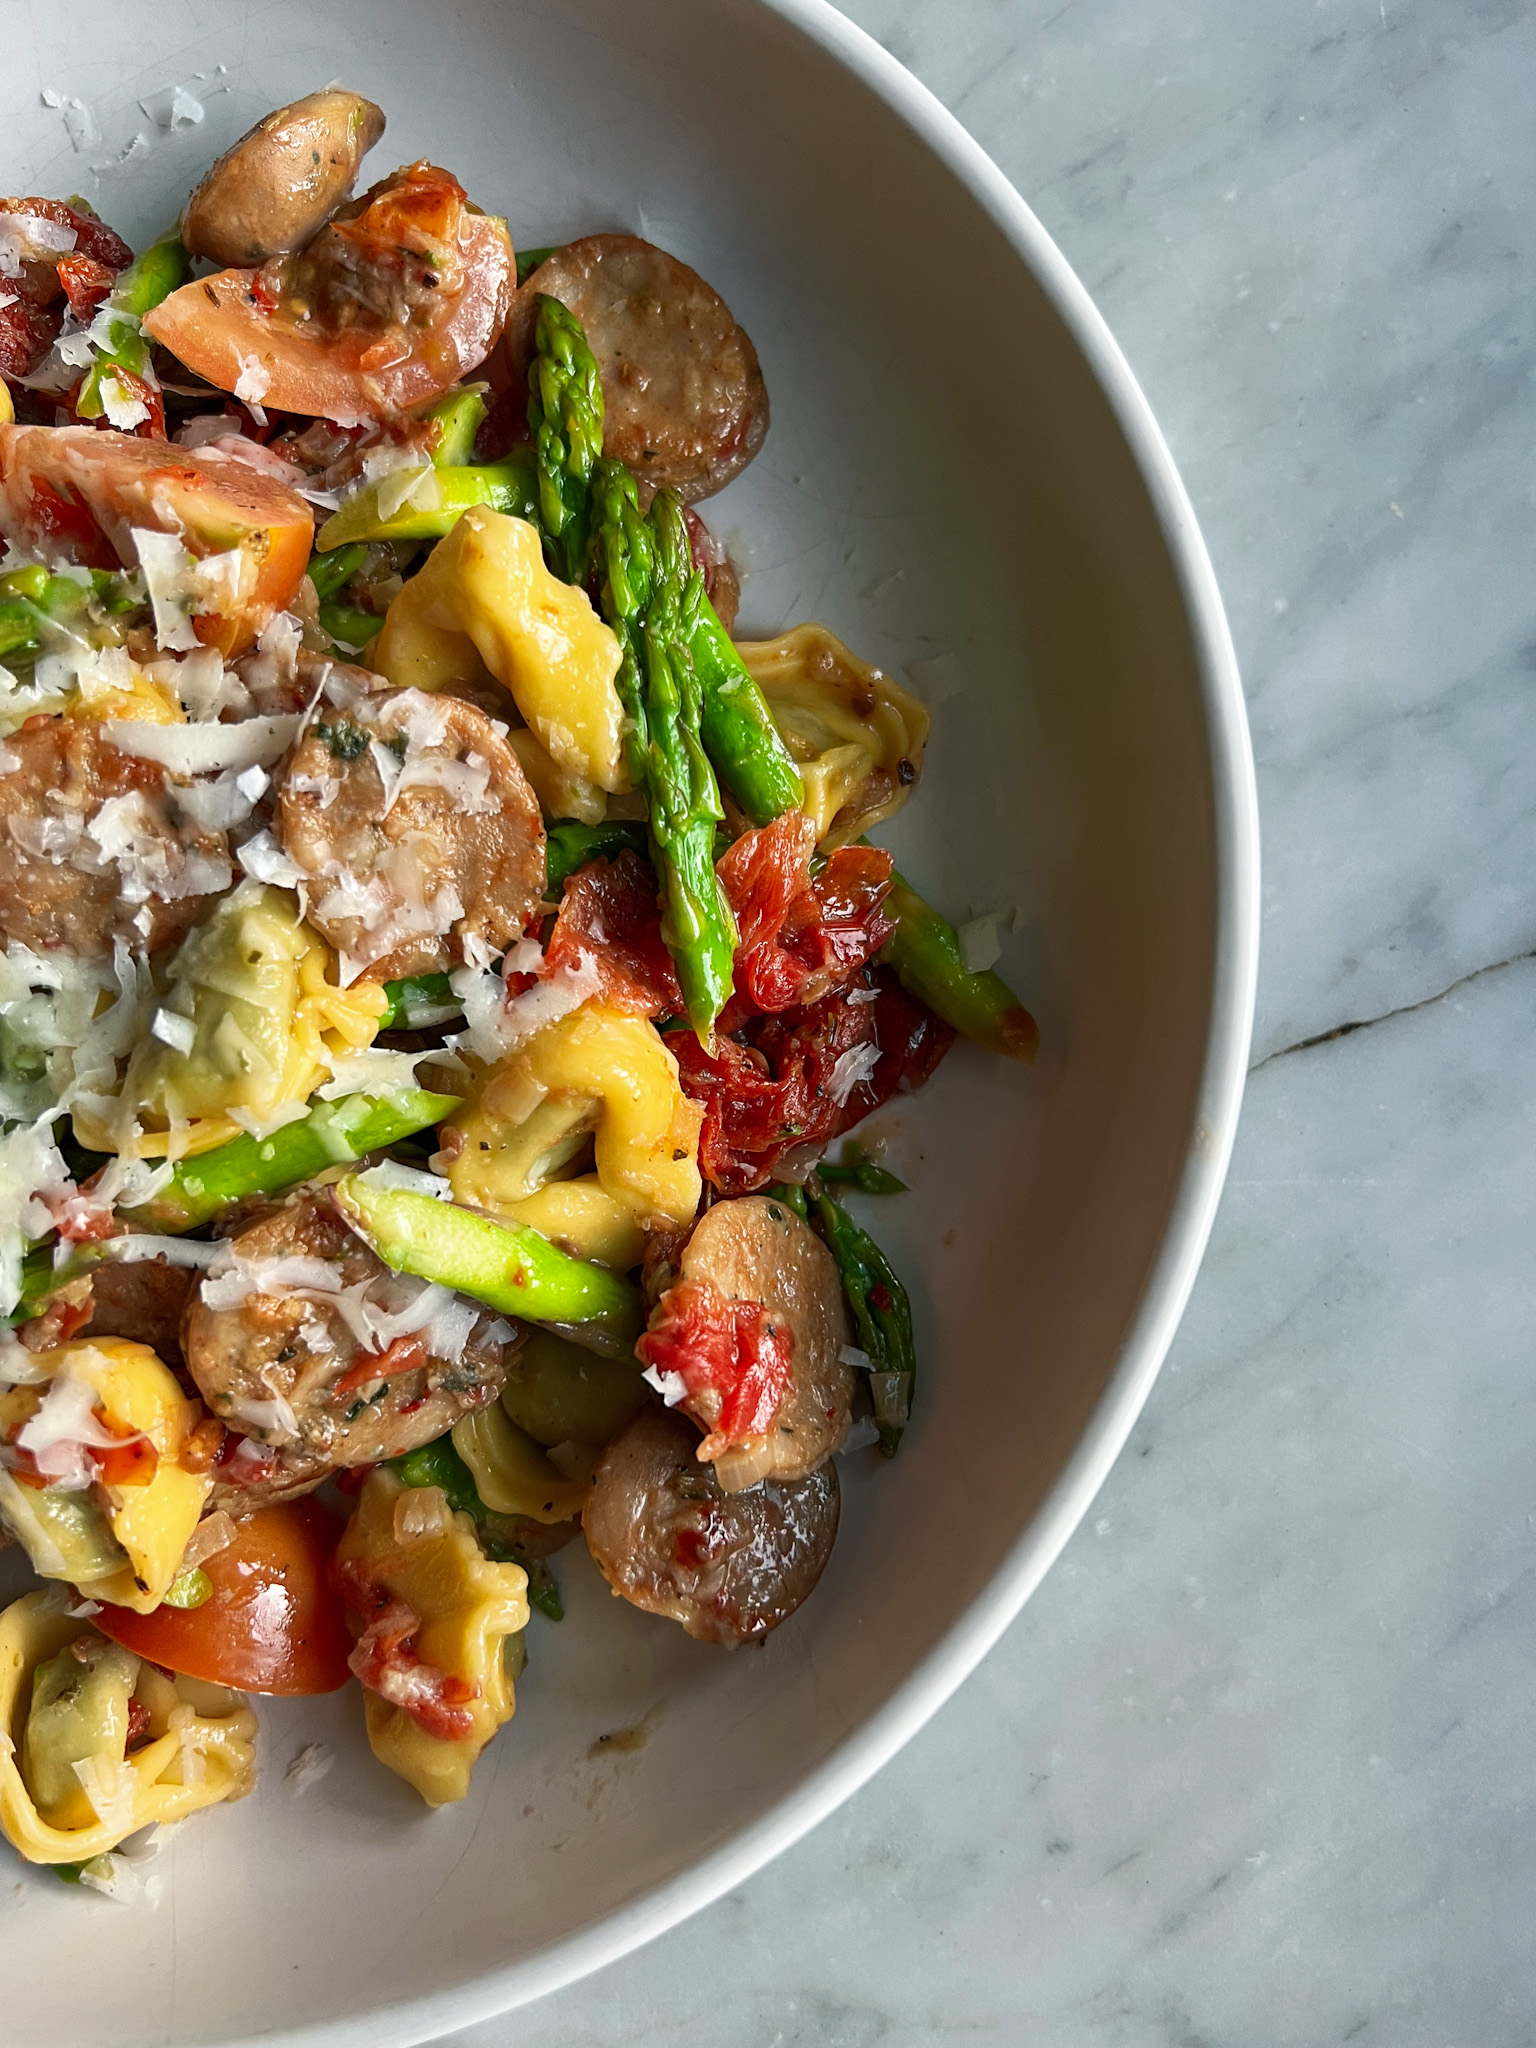 Trader Joes Chicken Sausage and tortellini with asparagus and tomatoes